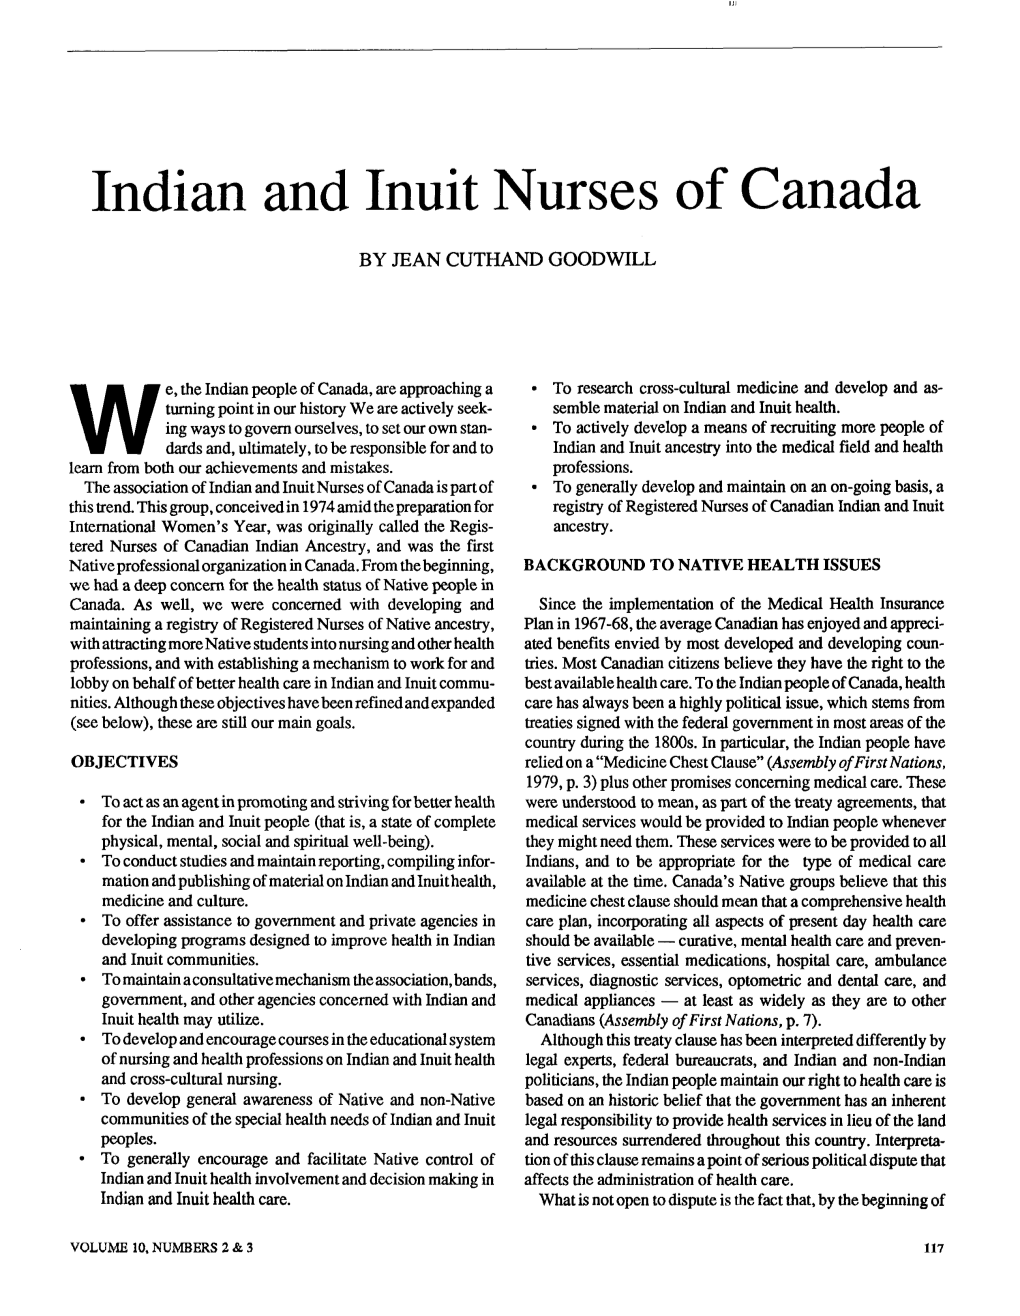 Indian and Inuit Nurses of Canada